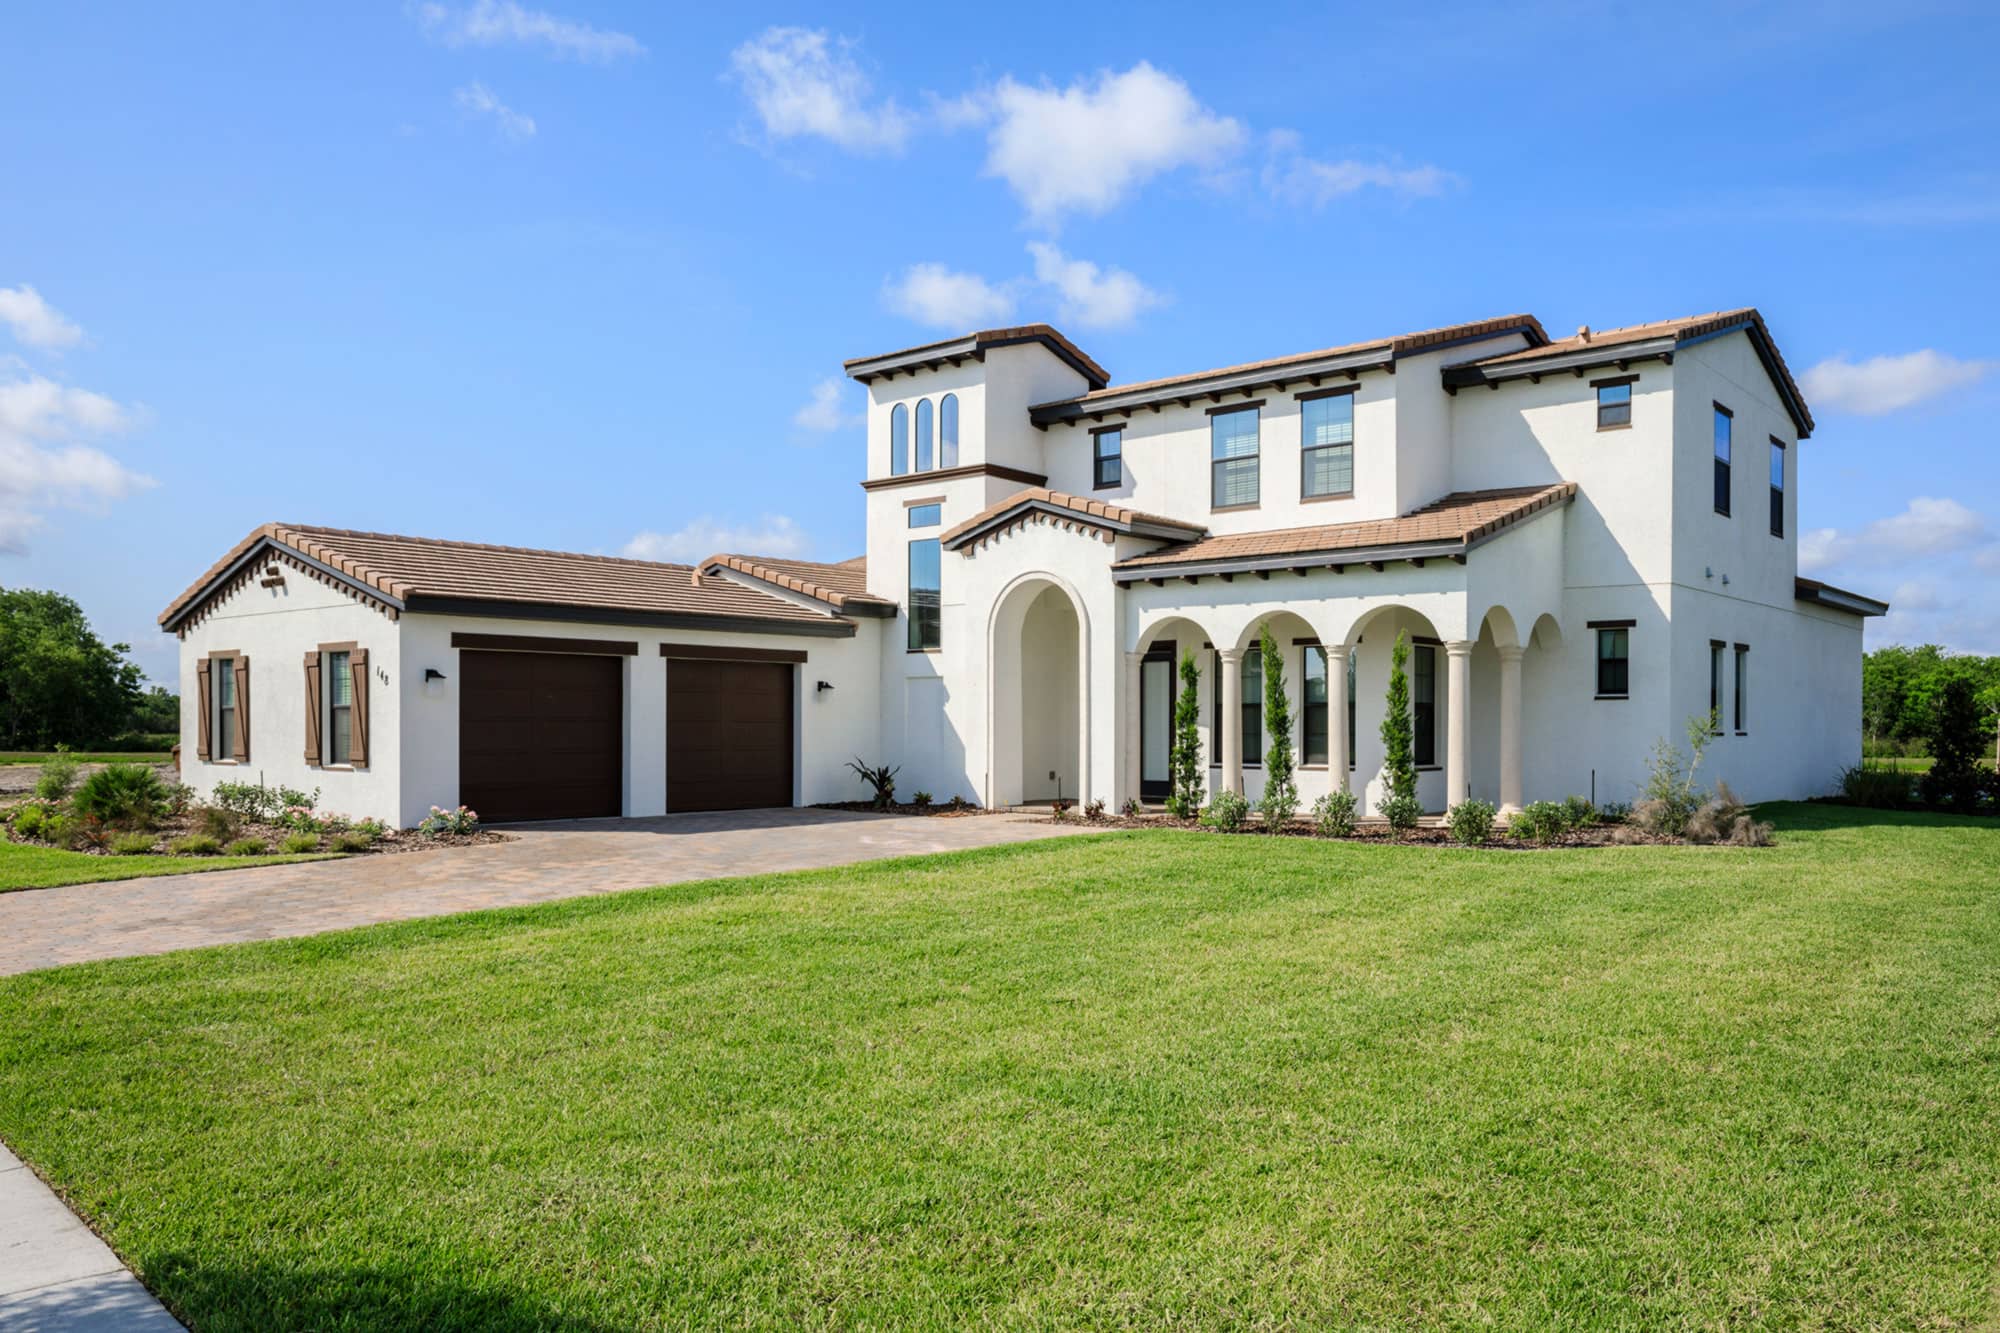 exterior of 5 bedroom vacation rental home at Balmoral Florida Resort in Haines City, FL